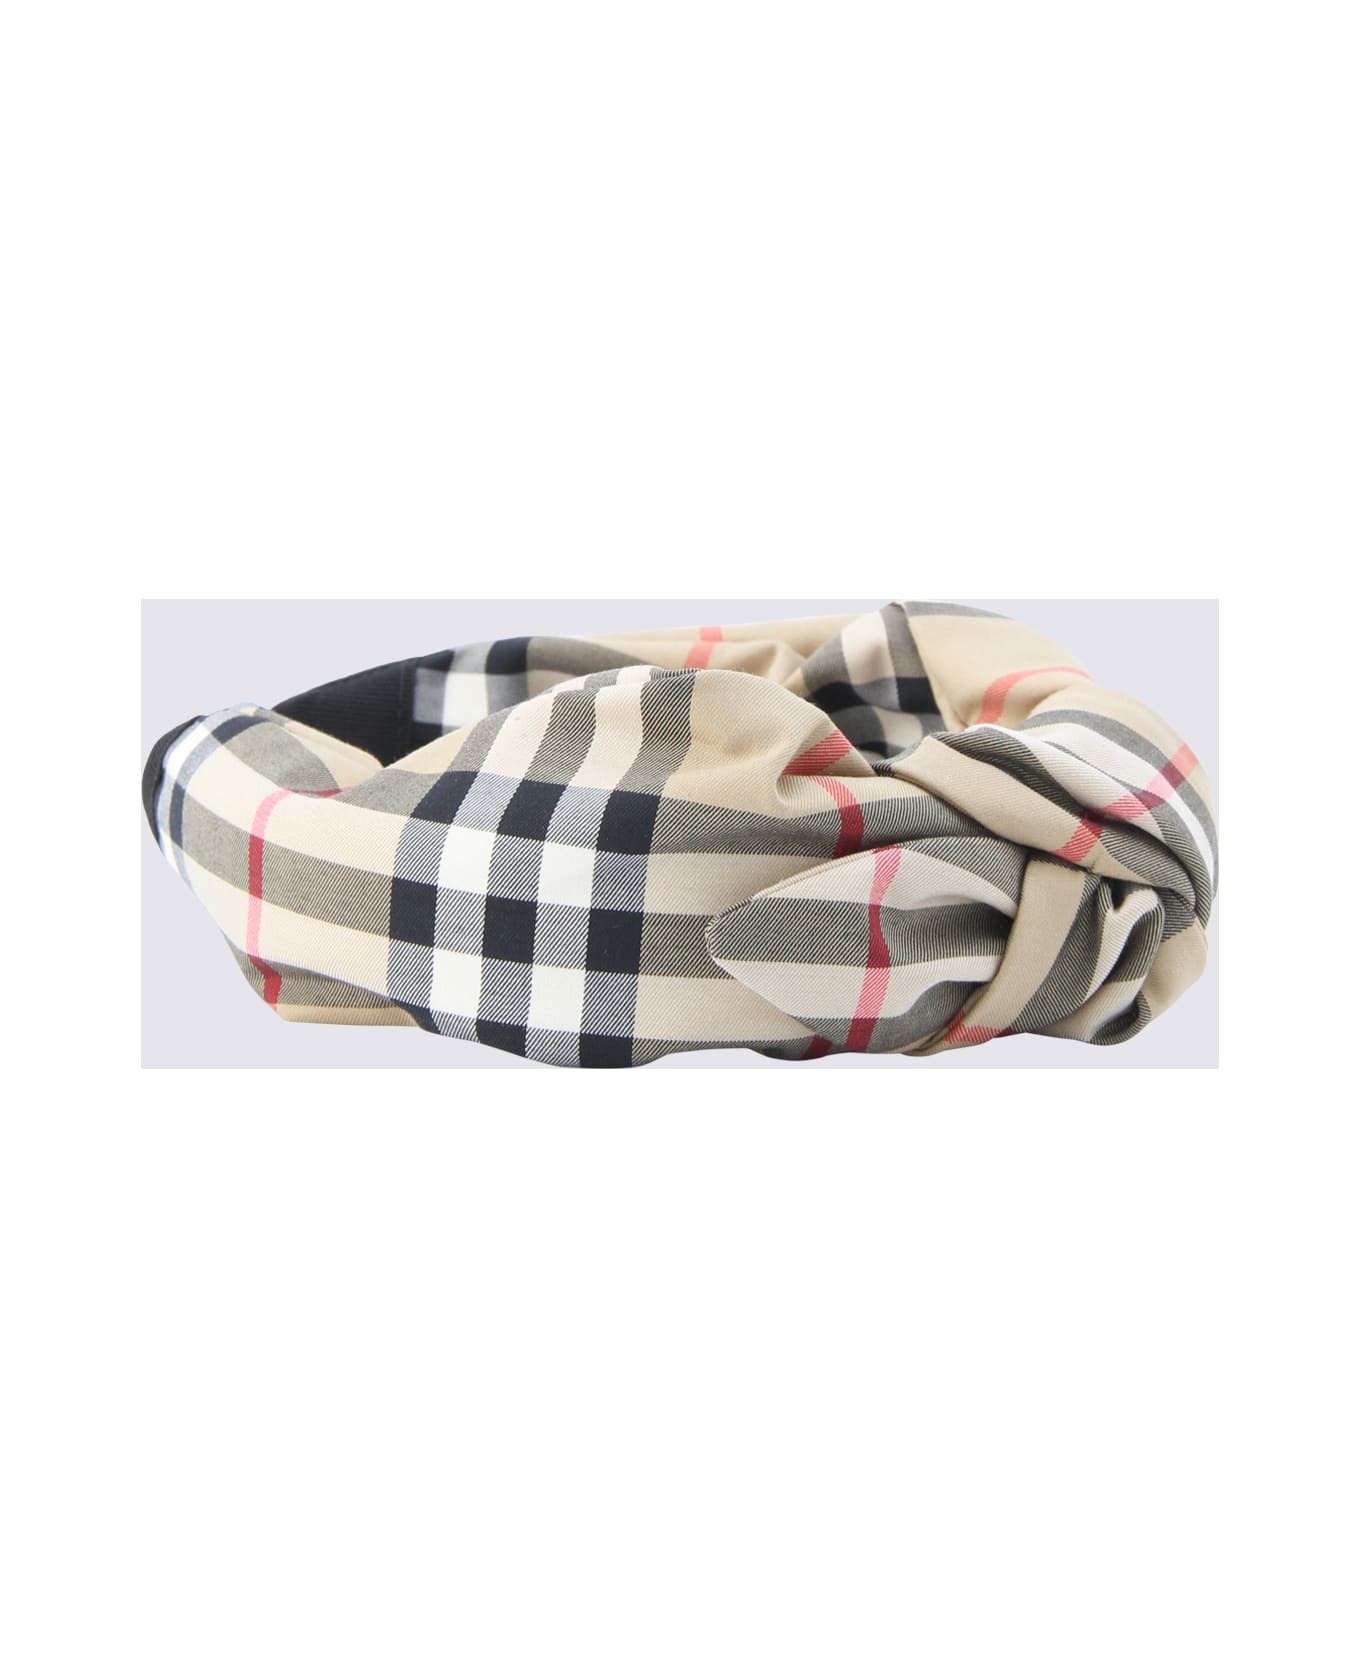 Burberry Archive Beige Check Hairband - ARCHIVE BEIGE CHK アクセサリー＆ギフト